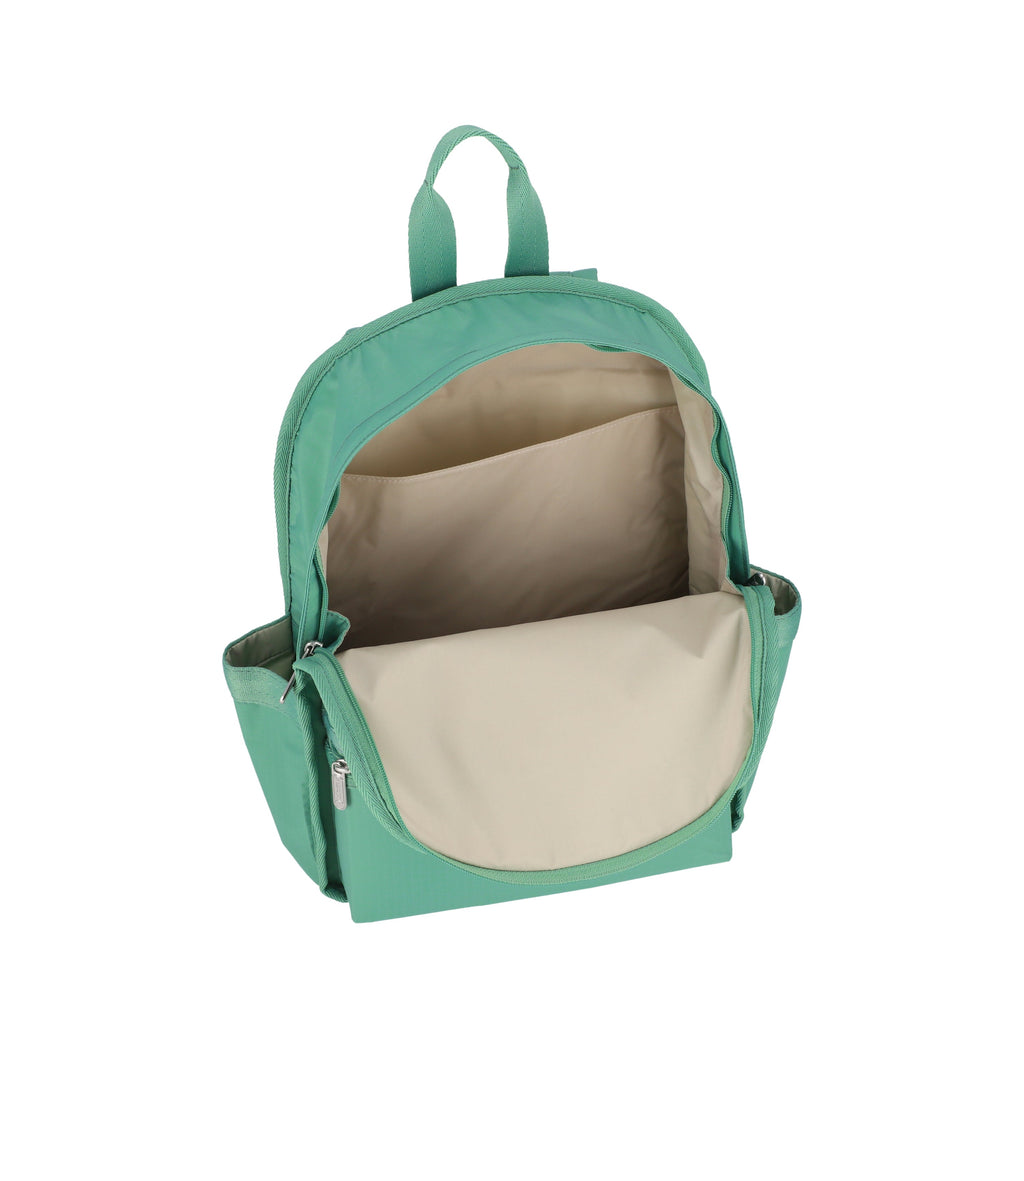 Route Small Backpack - Sage Green solid – LeSportsac